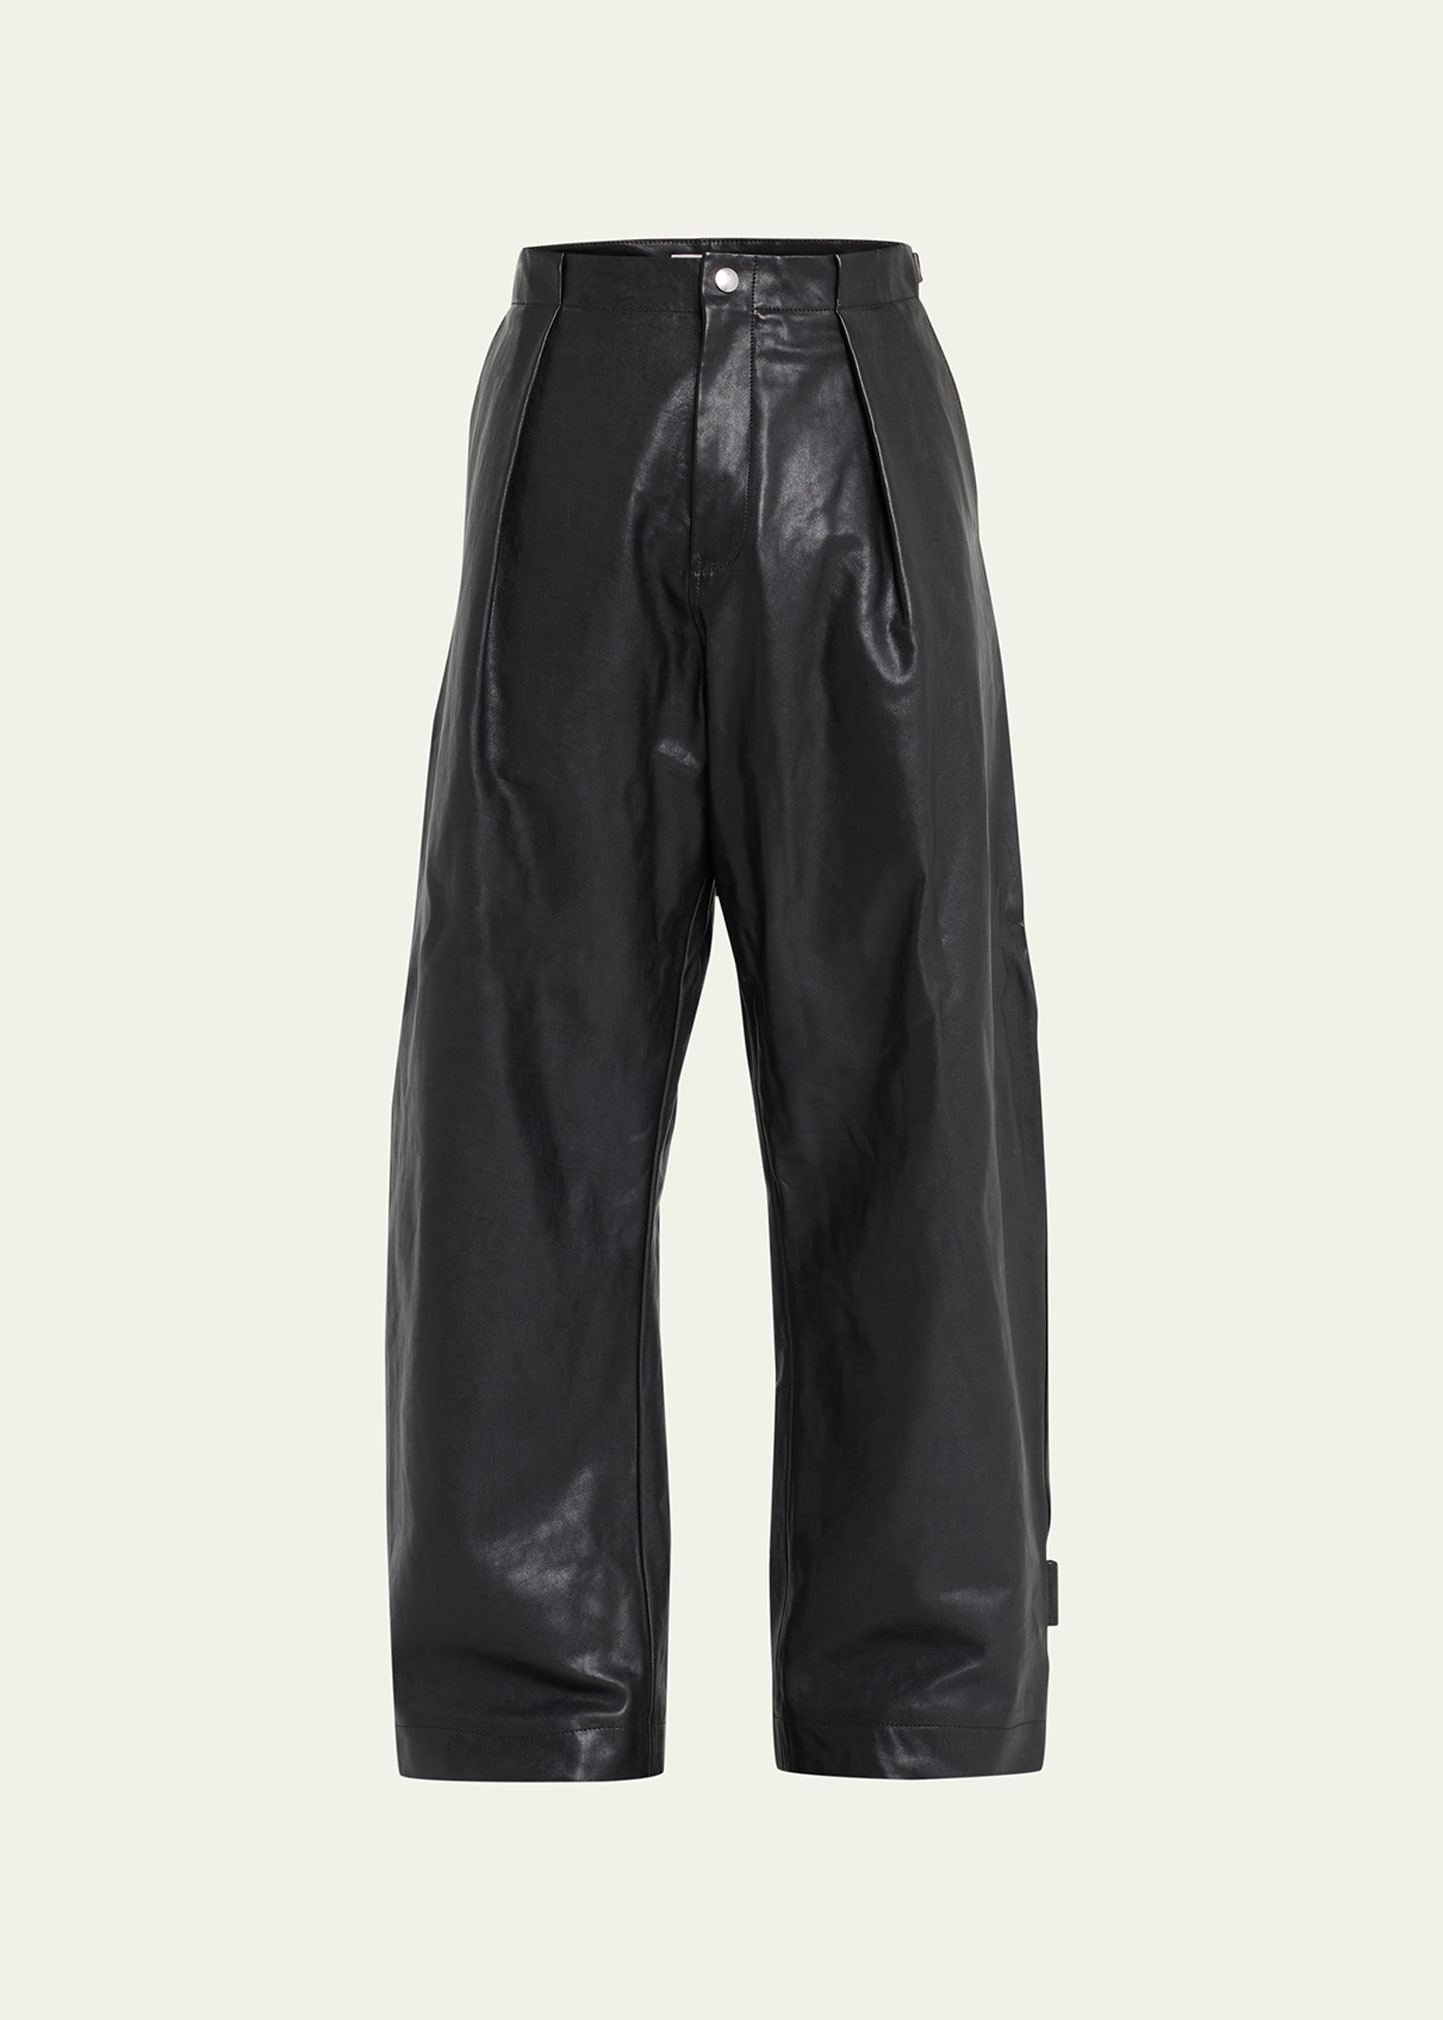 Men's Pleated Leather Pants